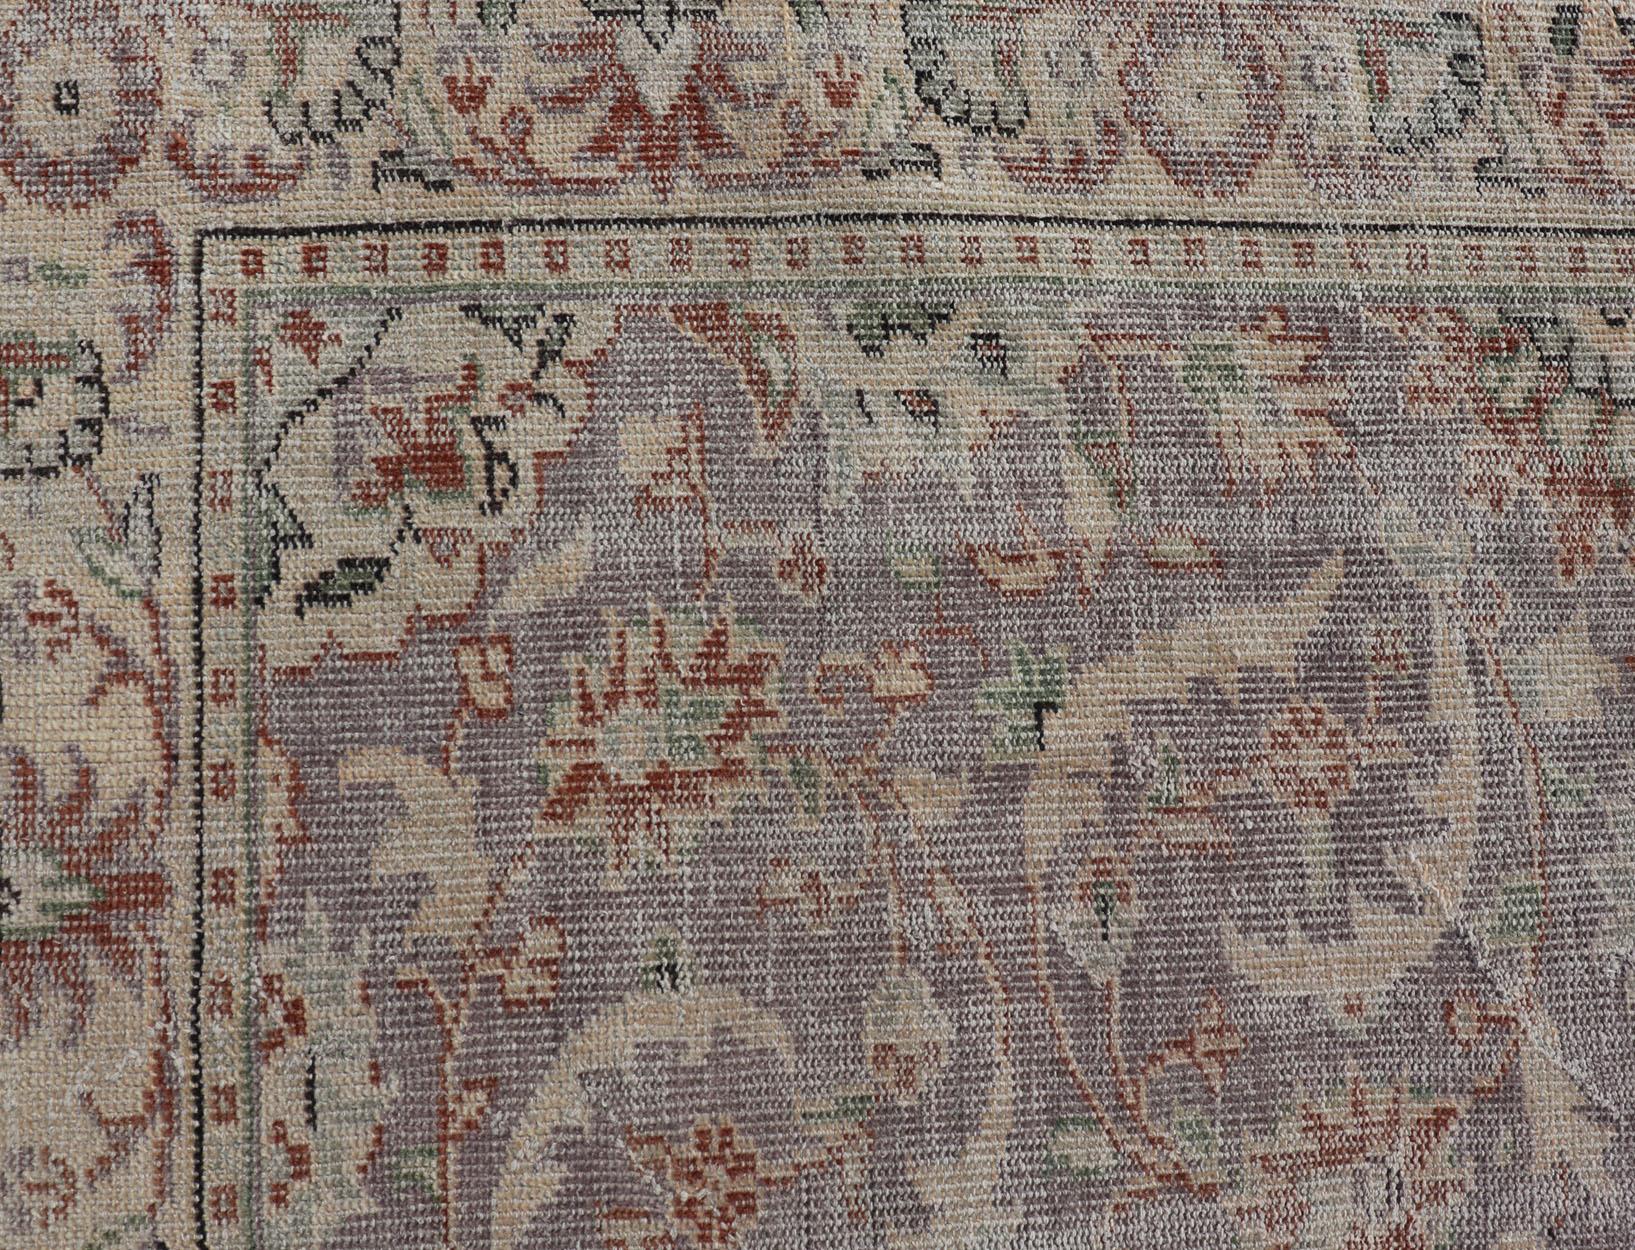 Vintage Turkish distressed oushak rug with all-over floral Design in Lilac color. Keivan Woven Arts / rug EN-P13614, country of origin / type: Turkey / Oushak, circa Mid-20th century.

This vintage Turkish Oushak rug has been hand-knotted in wool